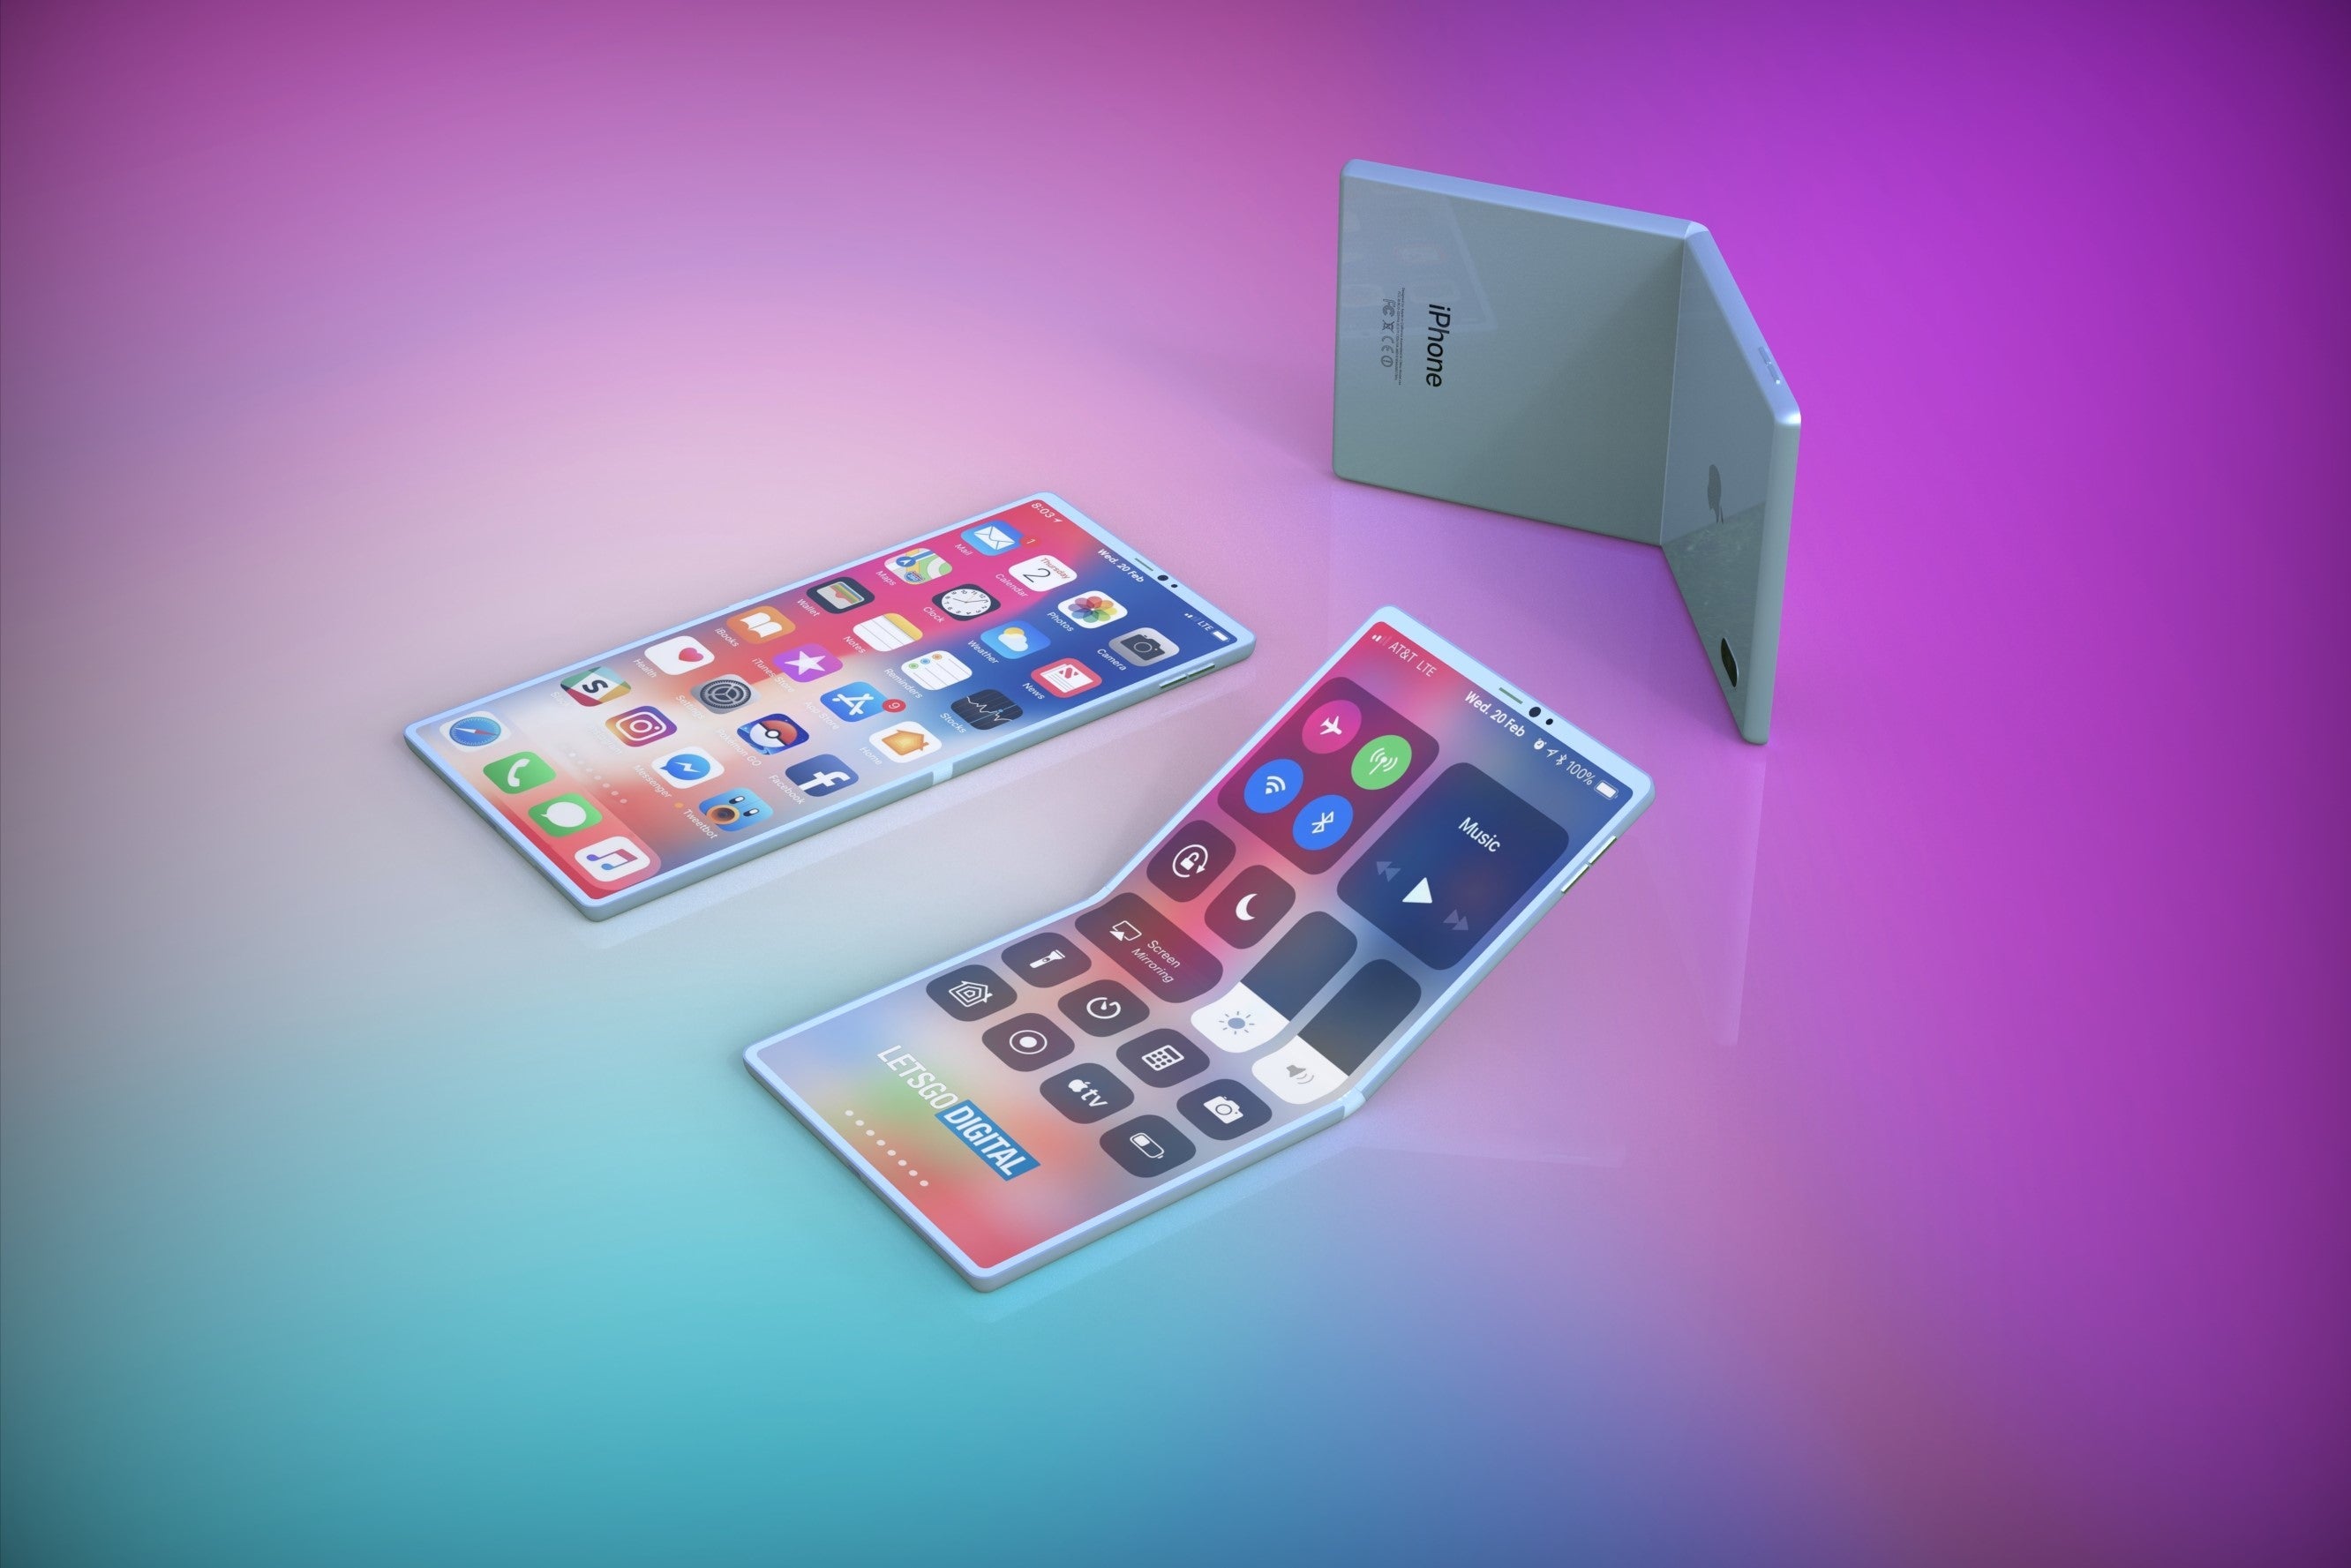 Apple foldable smartphone concept render based on patent - This is what Apple's foldable smartphone could look like